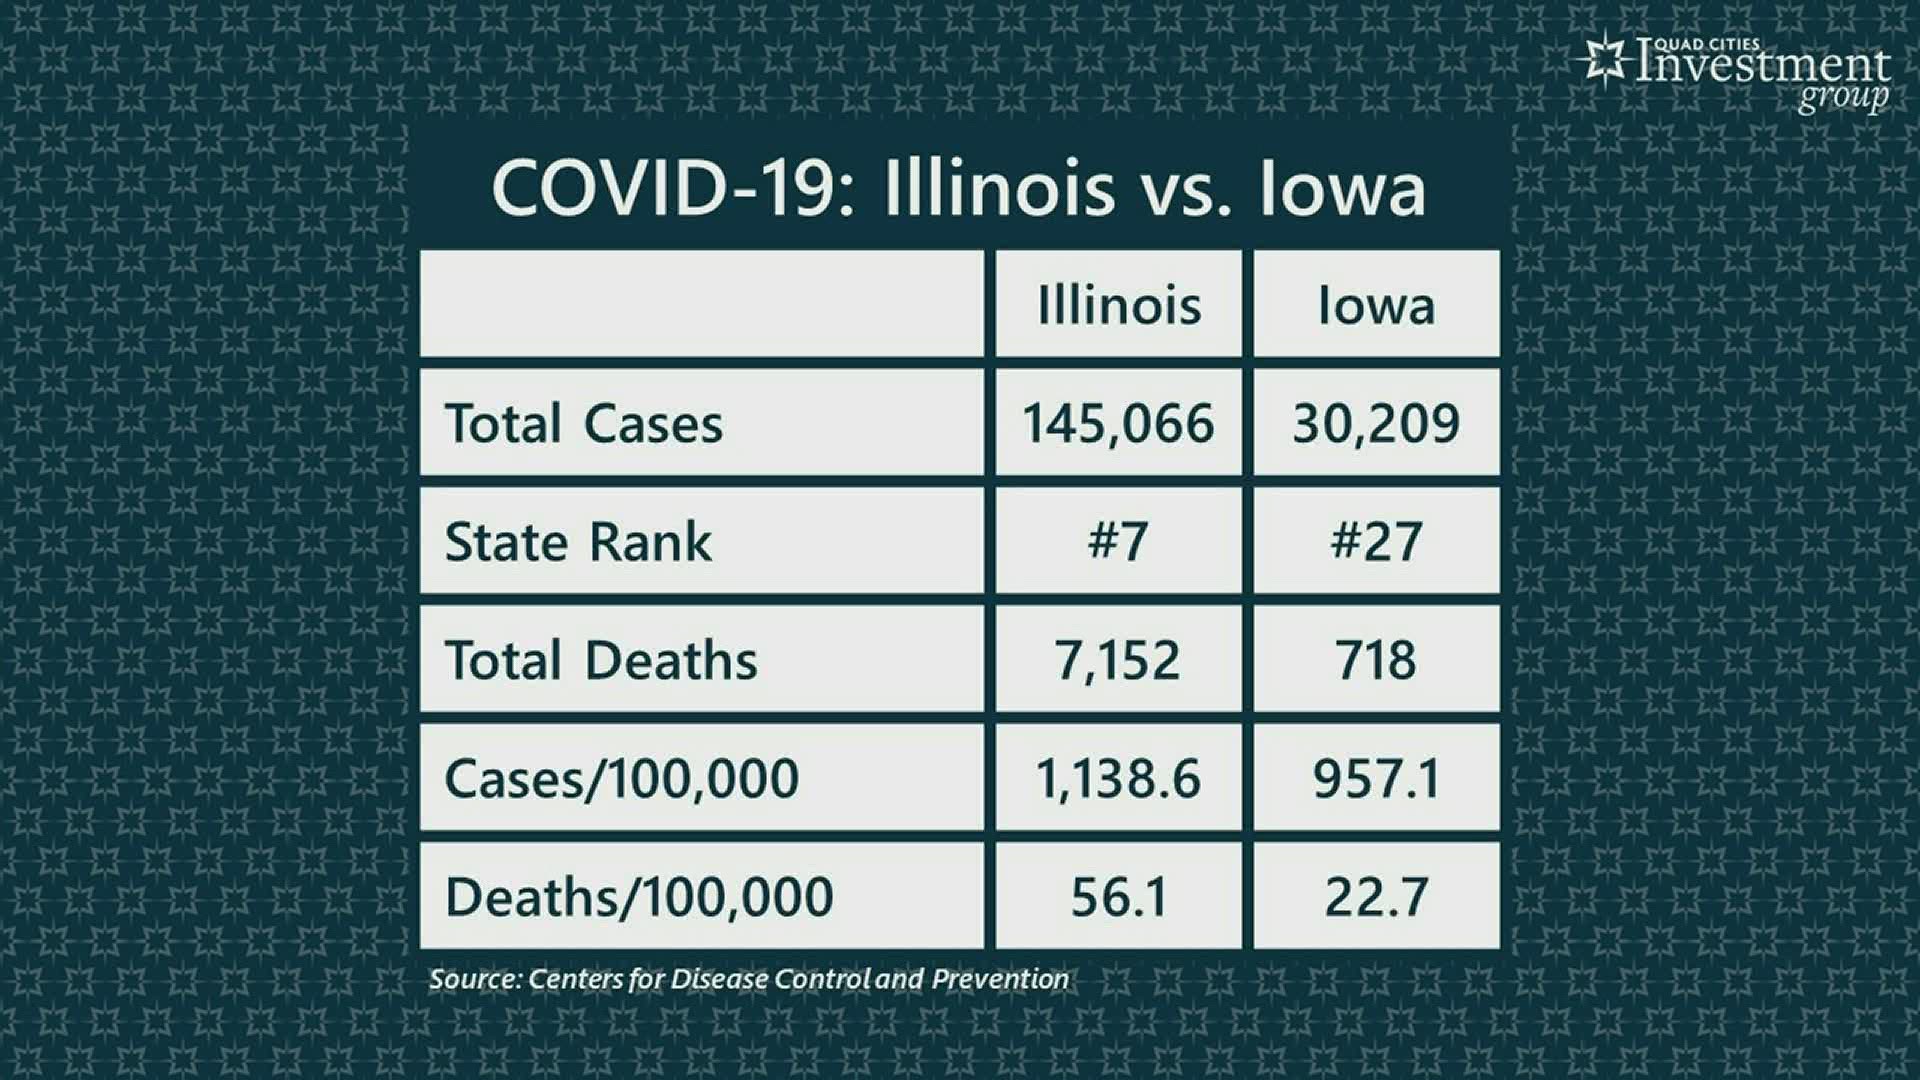 We know Iowa has been more business friendly after the coronavirus, but should that be the case?